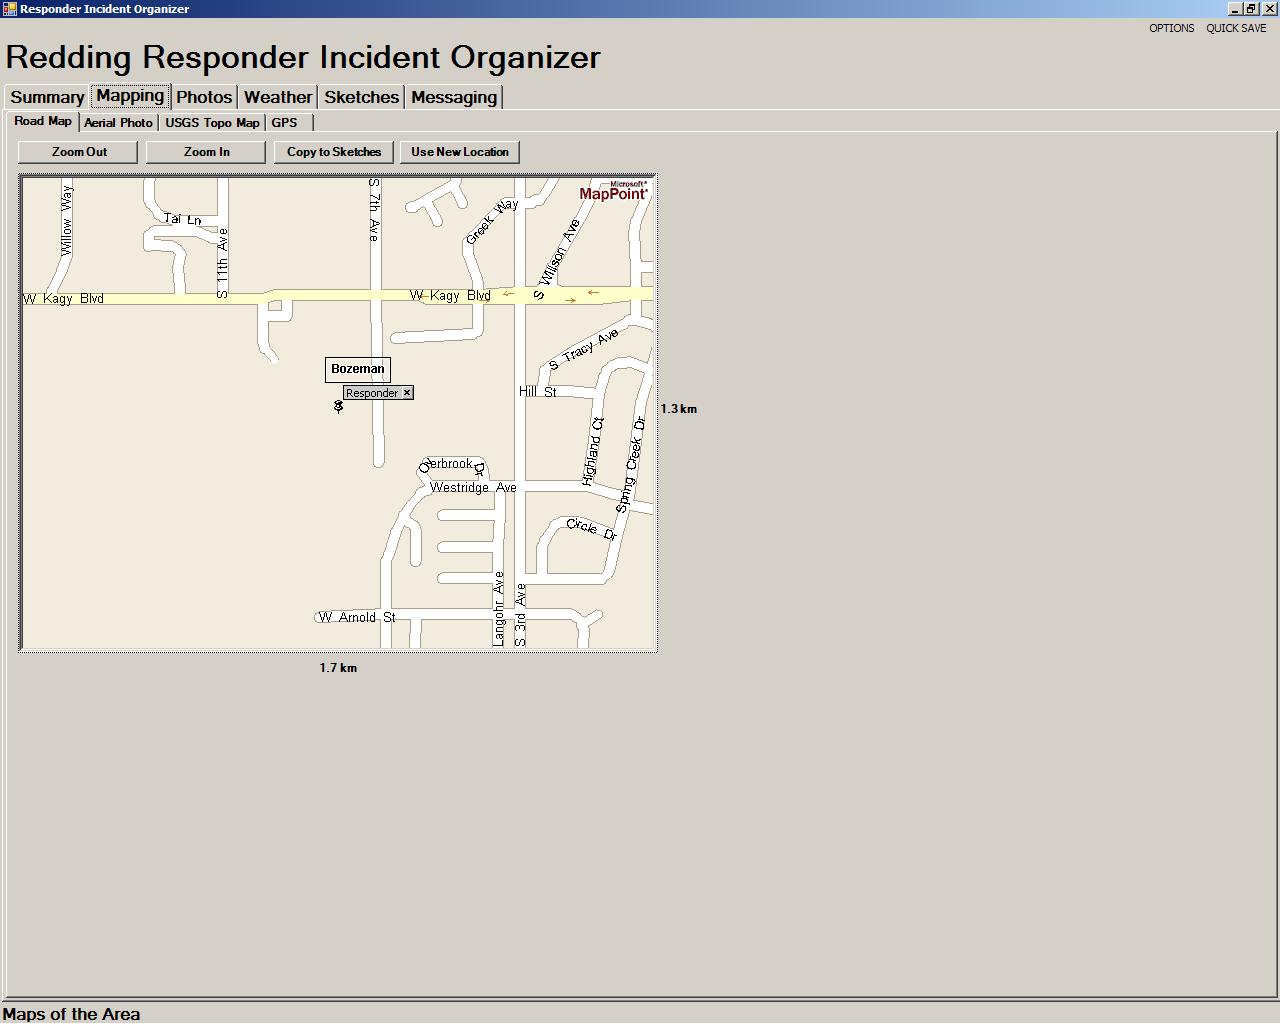 Responder software screenshot: The mapping tab shows street maps, aerial photos or topographical maps of the surrounding area.